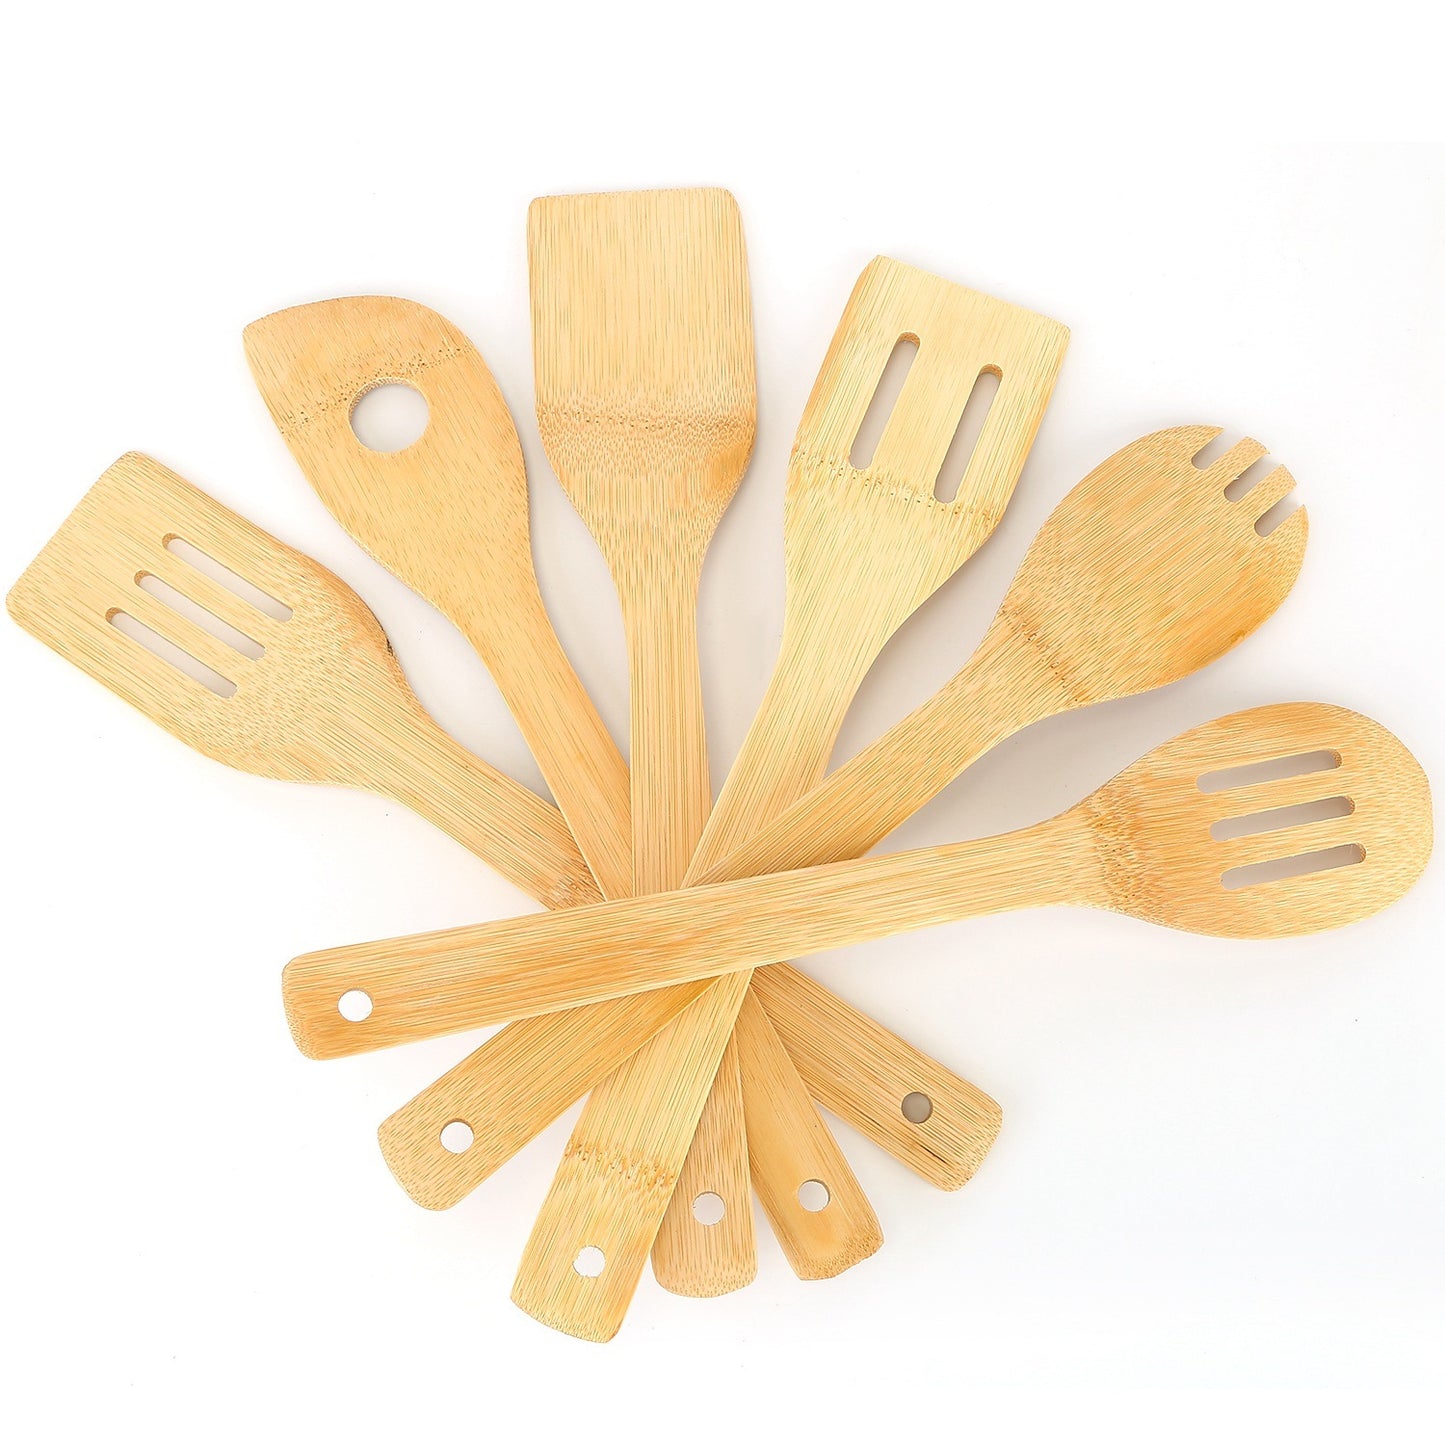 6Pcs Cooking Utensil Bamboo Wooden Spoons Spatula Kitchen Cooking Tools